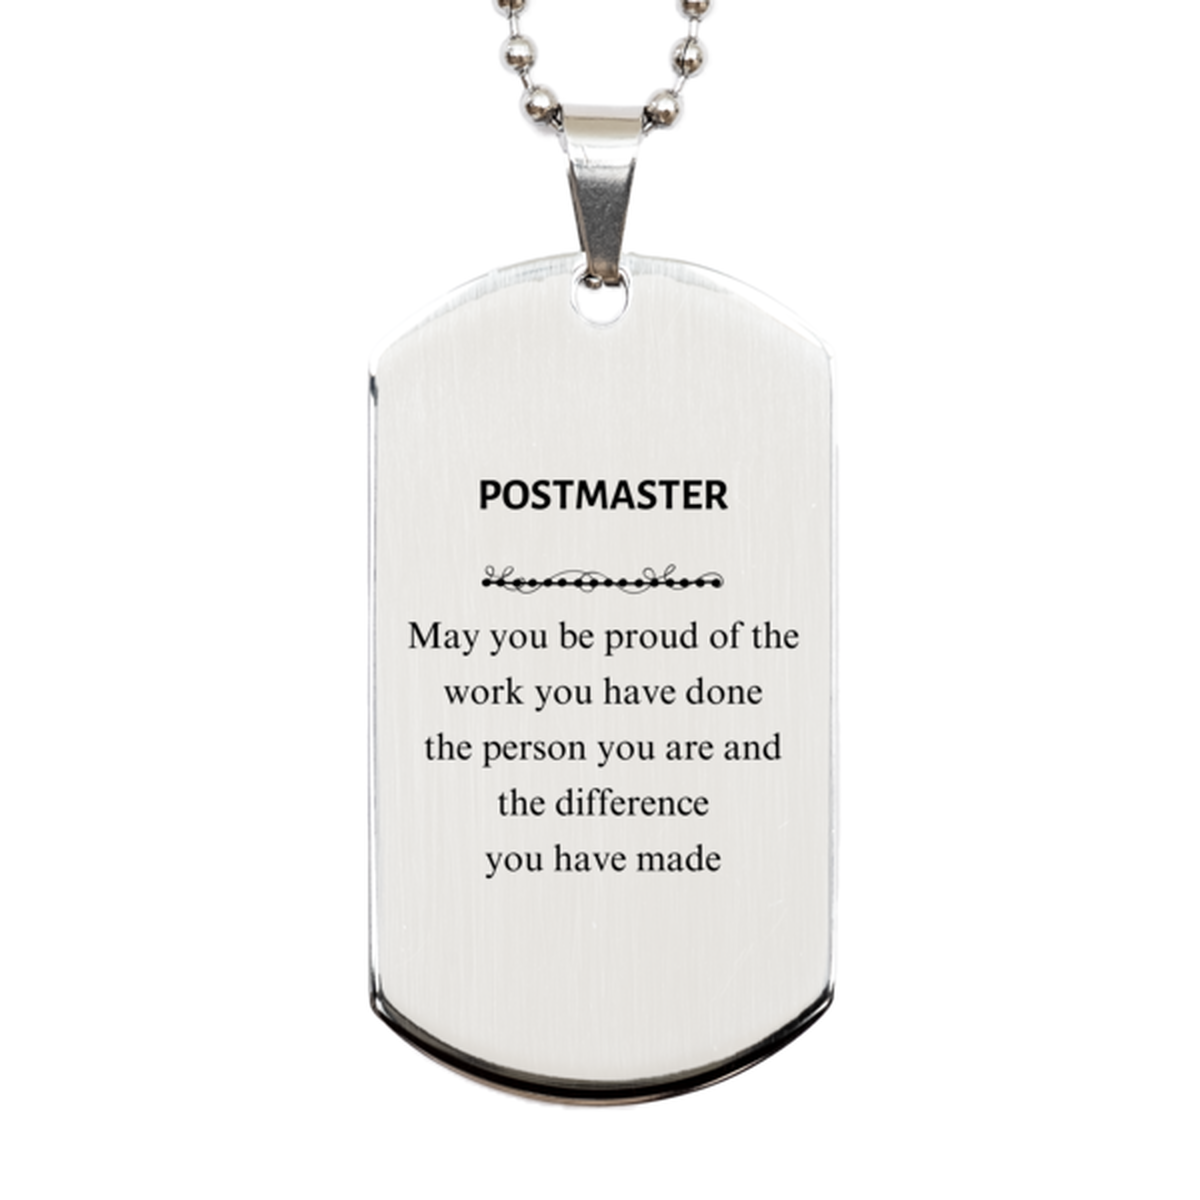 Postmaster May you be proud of the work you have done, Retirement Postmaster Silver Dog Tag for Colleague Appreciation Gifts Amazing for Postmaster